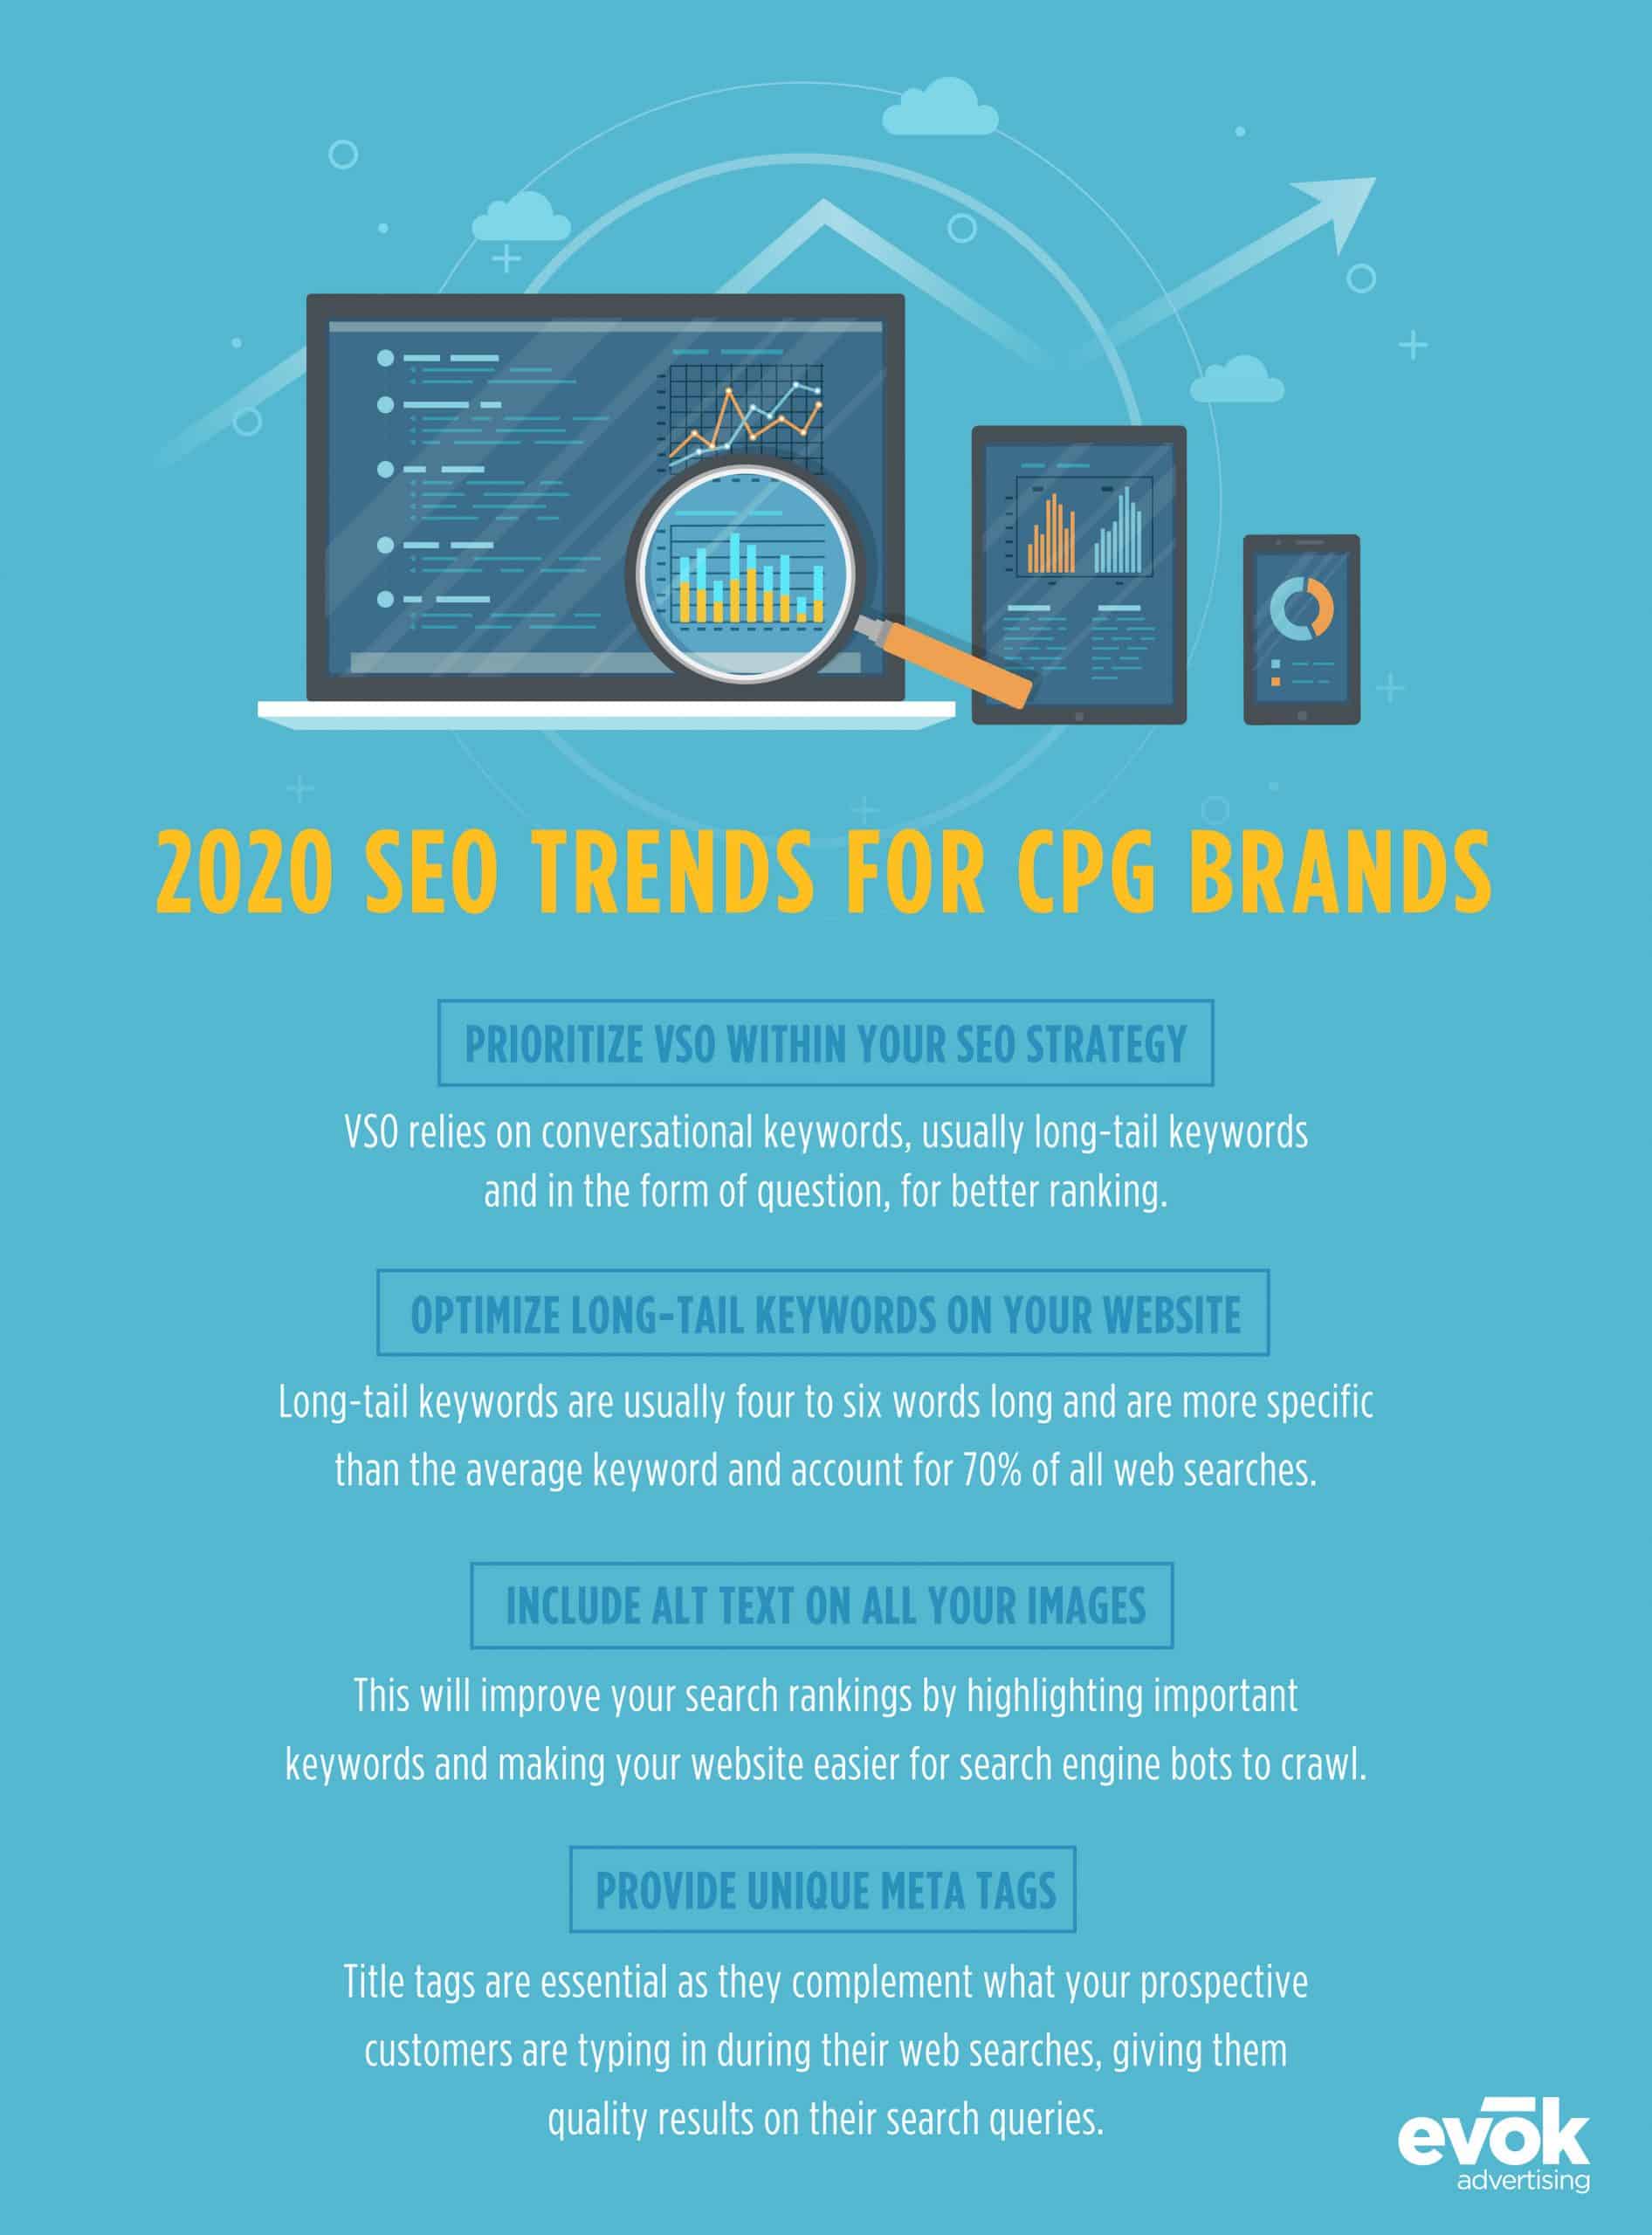 Search Engine Optimization Trends for CPG Brands in 2020 Accelerate Your Marketing Strategy